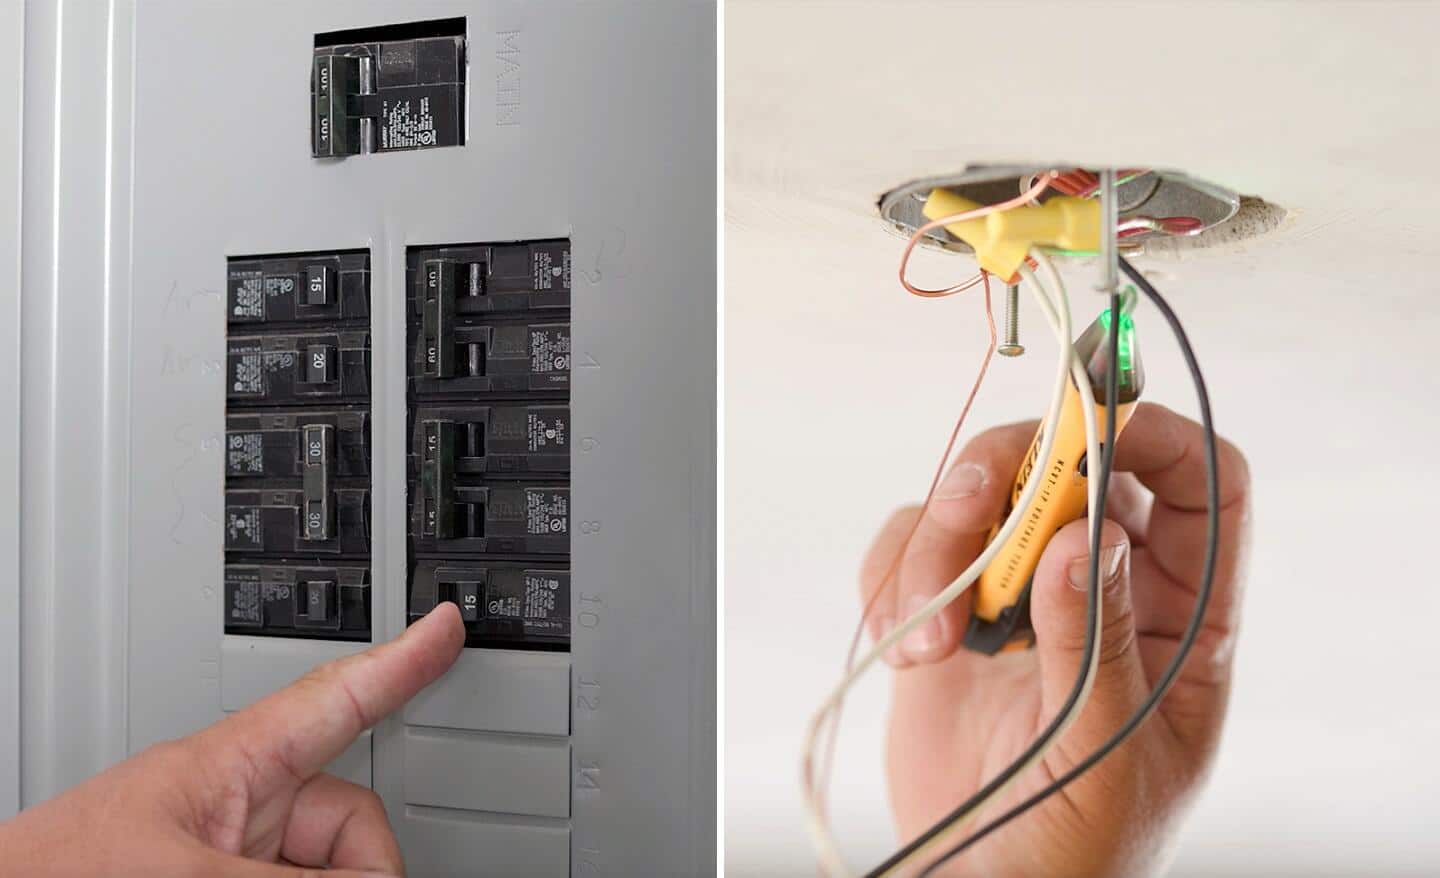 Left image: A person turns off a switch at an electrical service panel. Right image: A person uses a voltage tester on the wires coming from the ceiling.